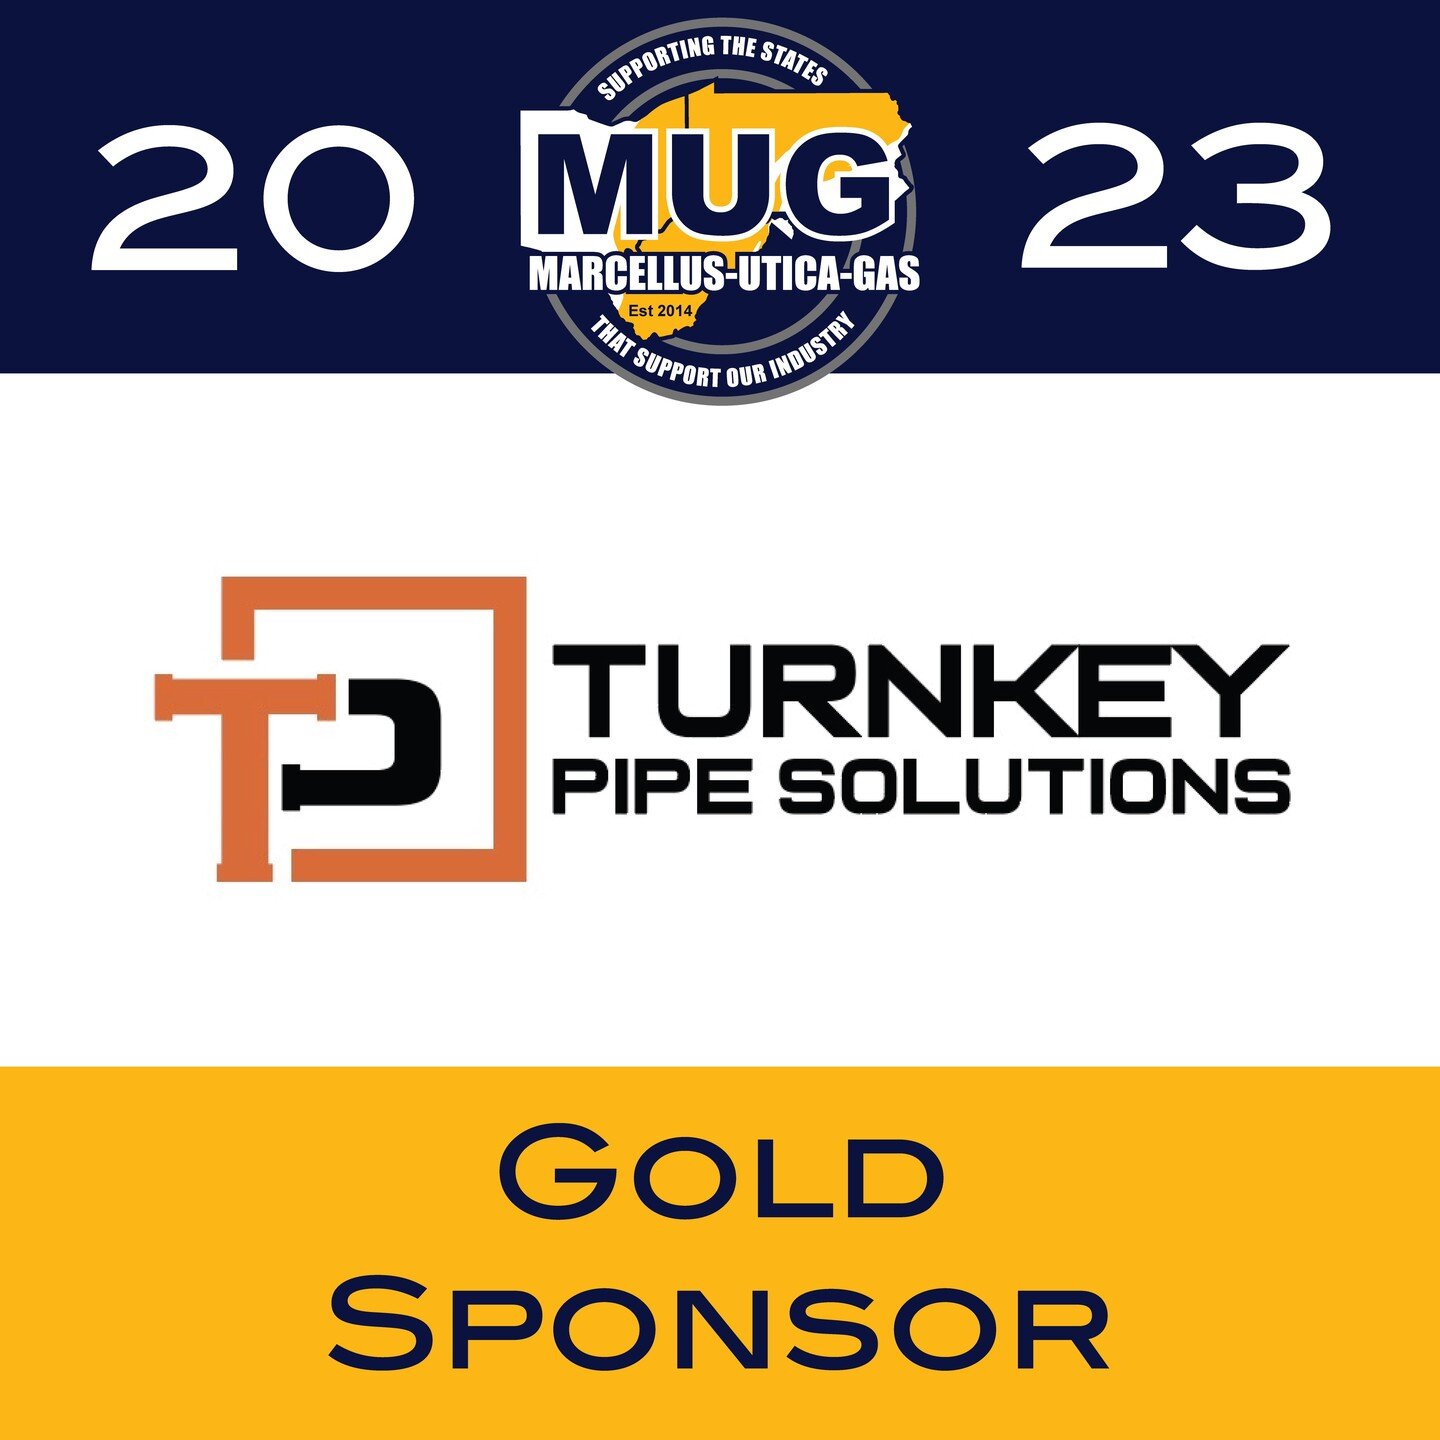 Thank you to our Gold Sponsor, Turnkey Pipe Solutions, for your support in 2023!